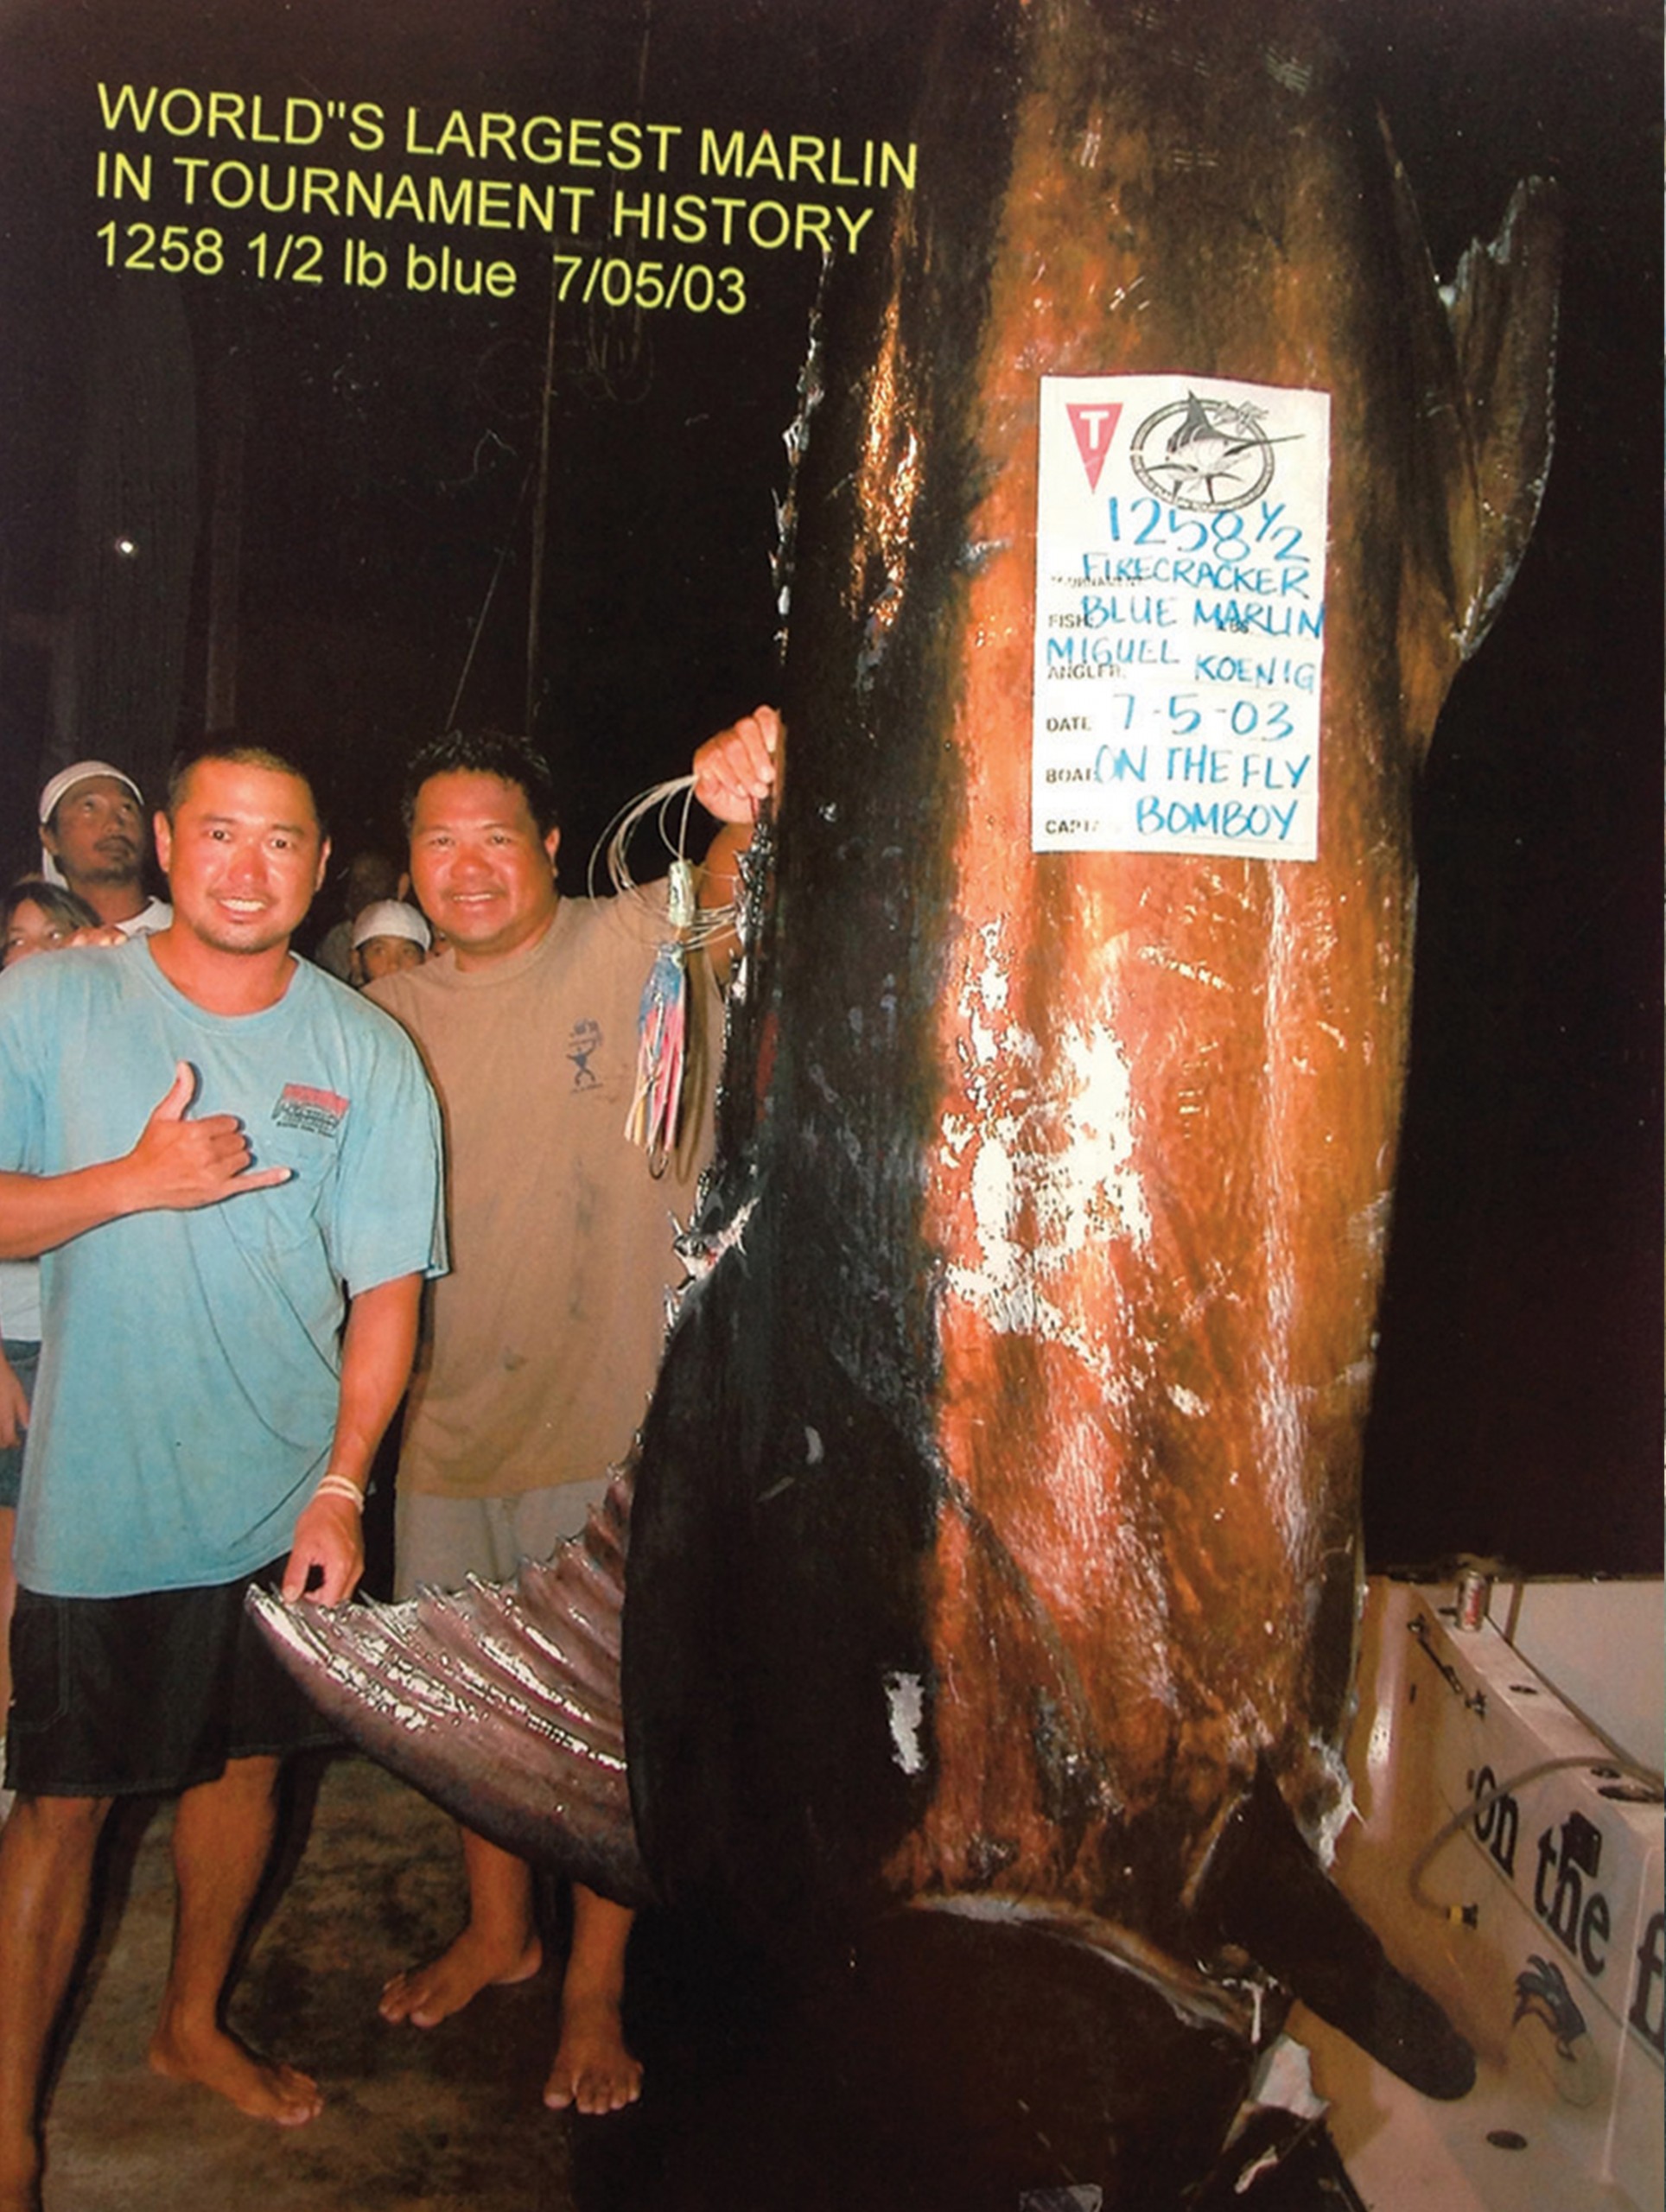 1258.5 lb marlin hanging from scale